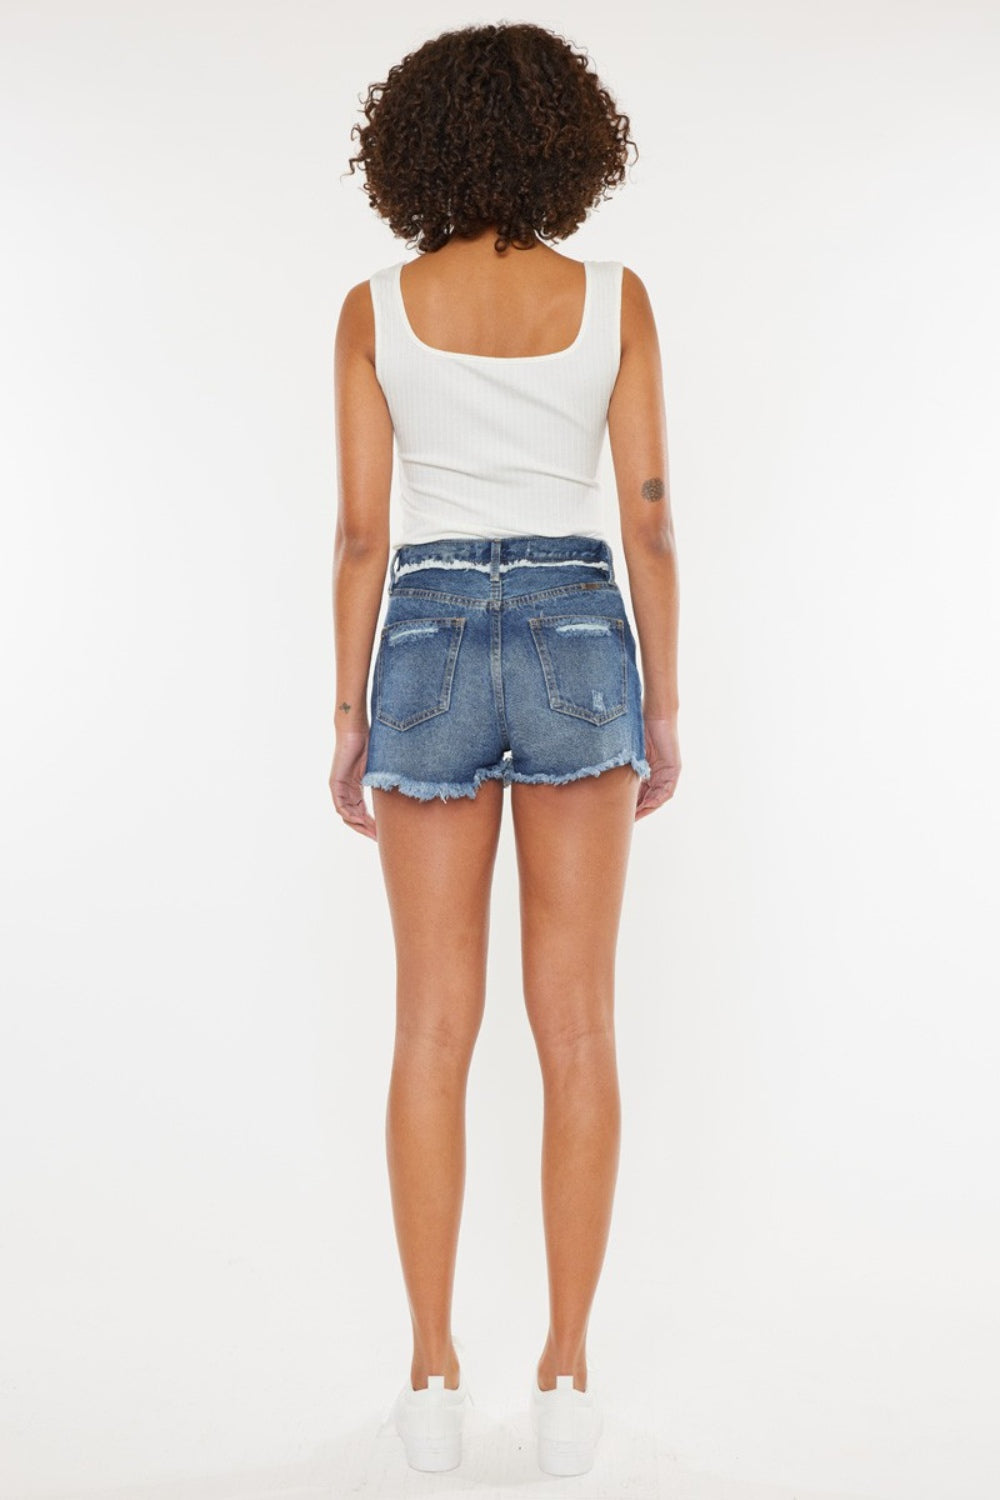 Pacifica Distressed Button Fly Denim Shorts